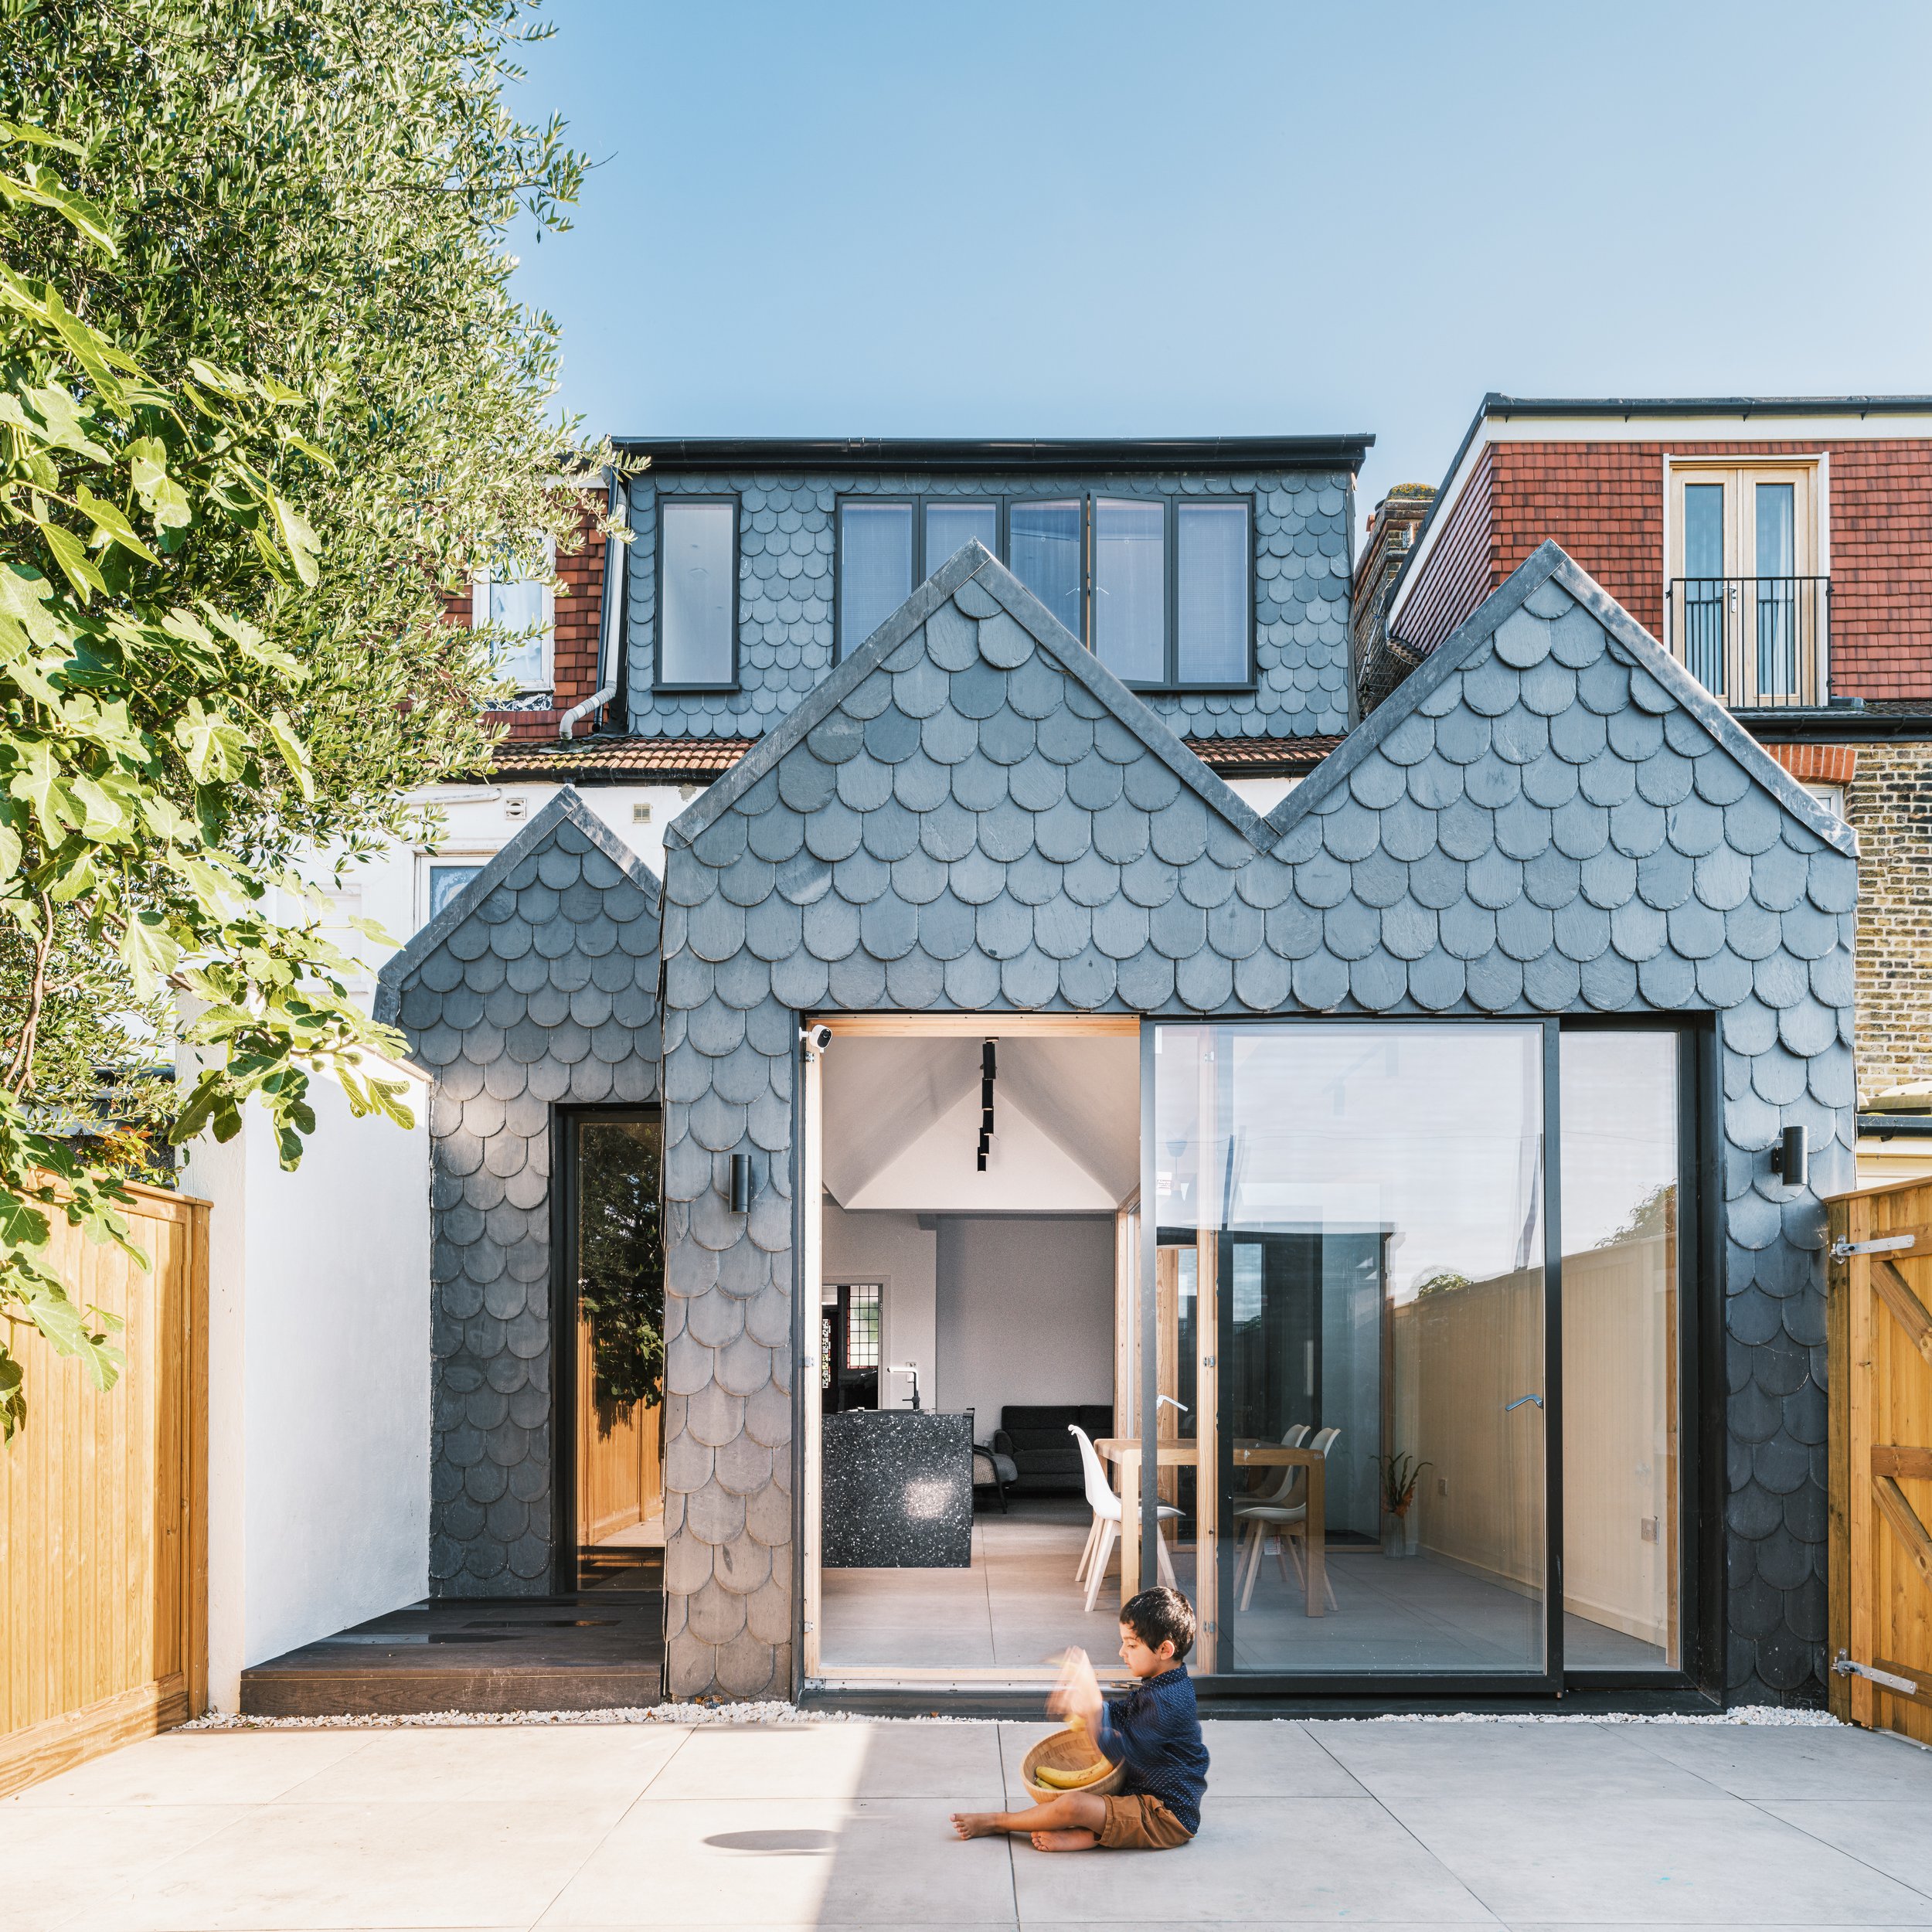 Fred+Howarth+Photography_Three+Pitched+Roofs+House_05.jpg